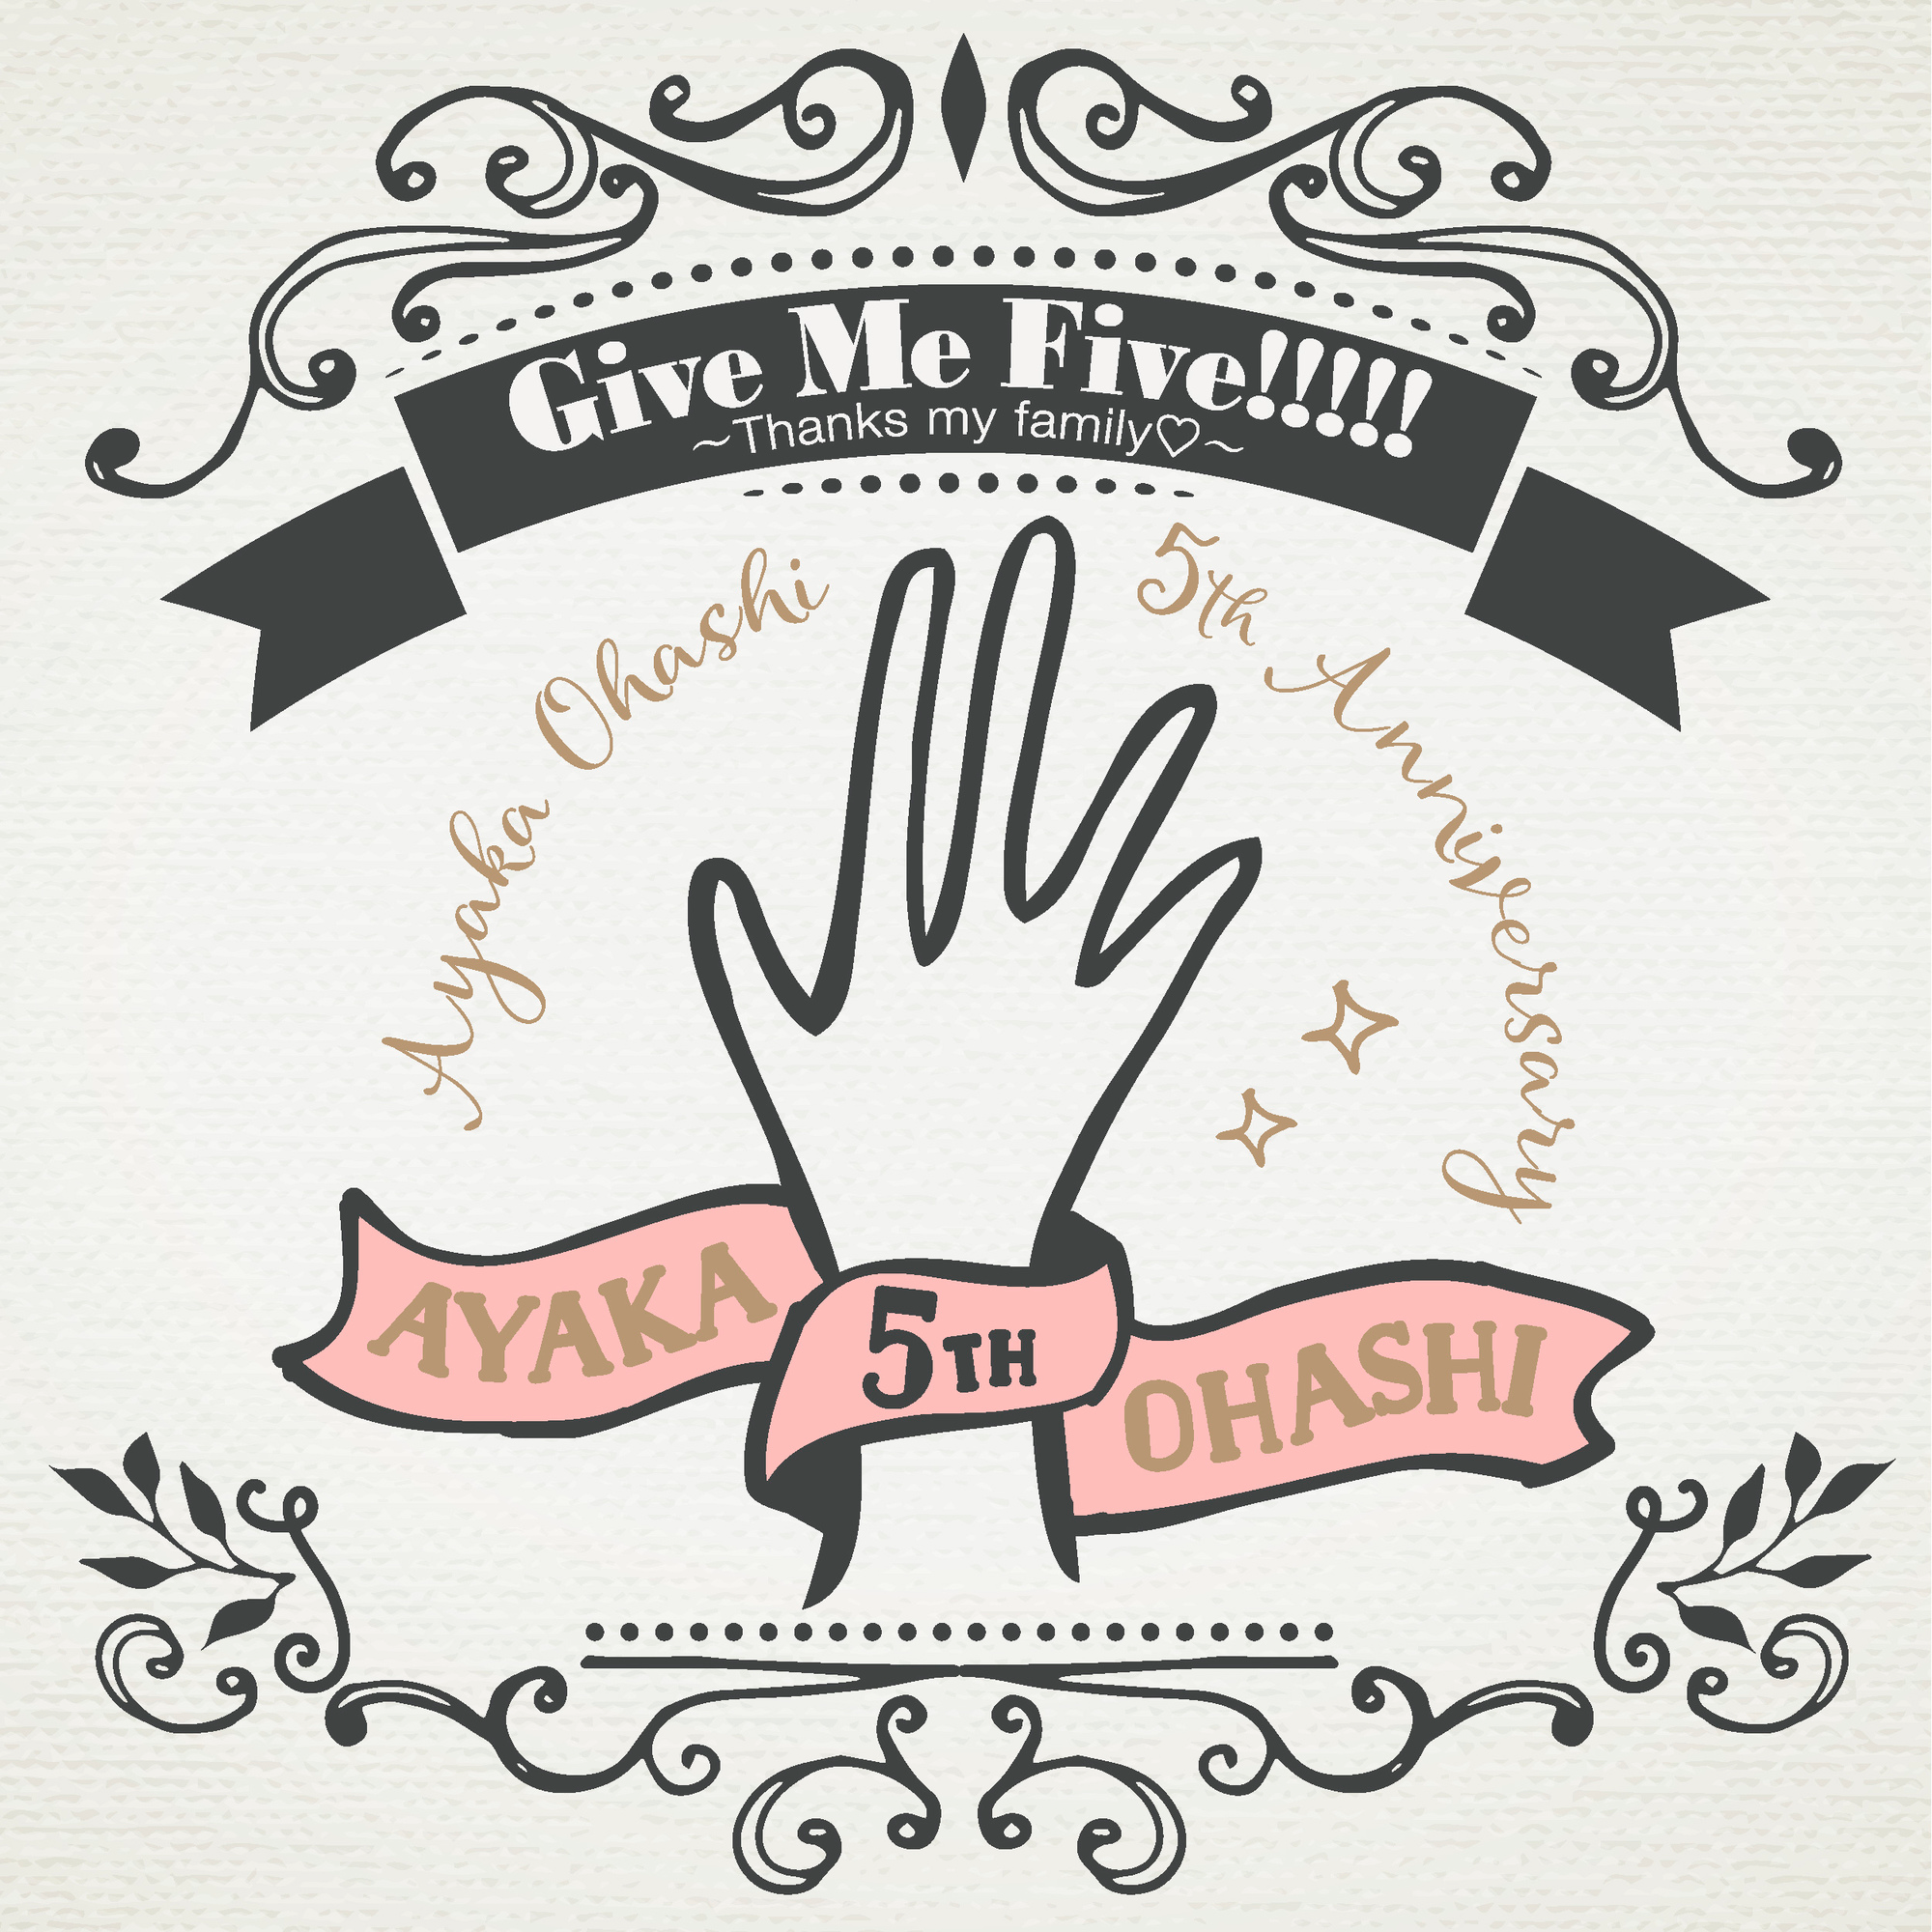 Give Me Five!!!!! Thanks my family